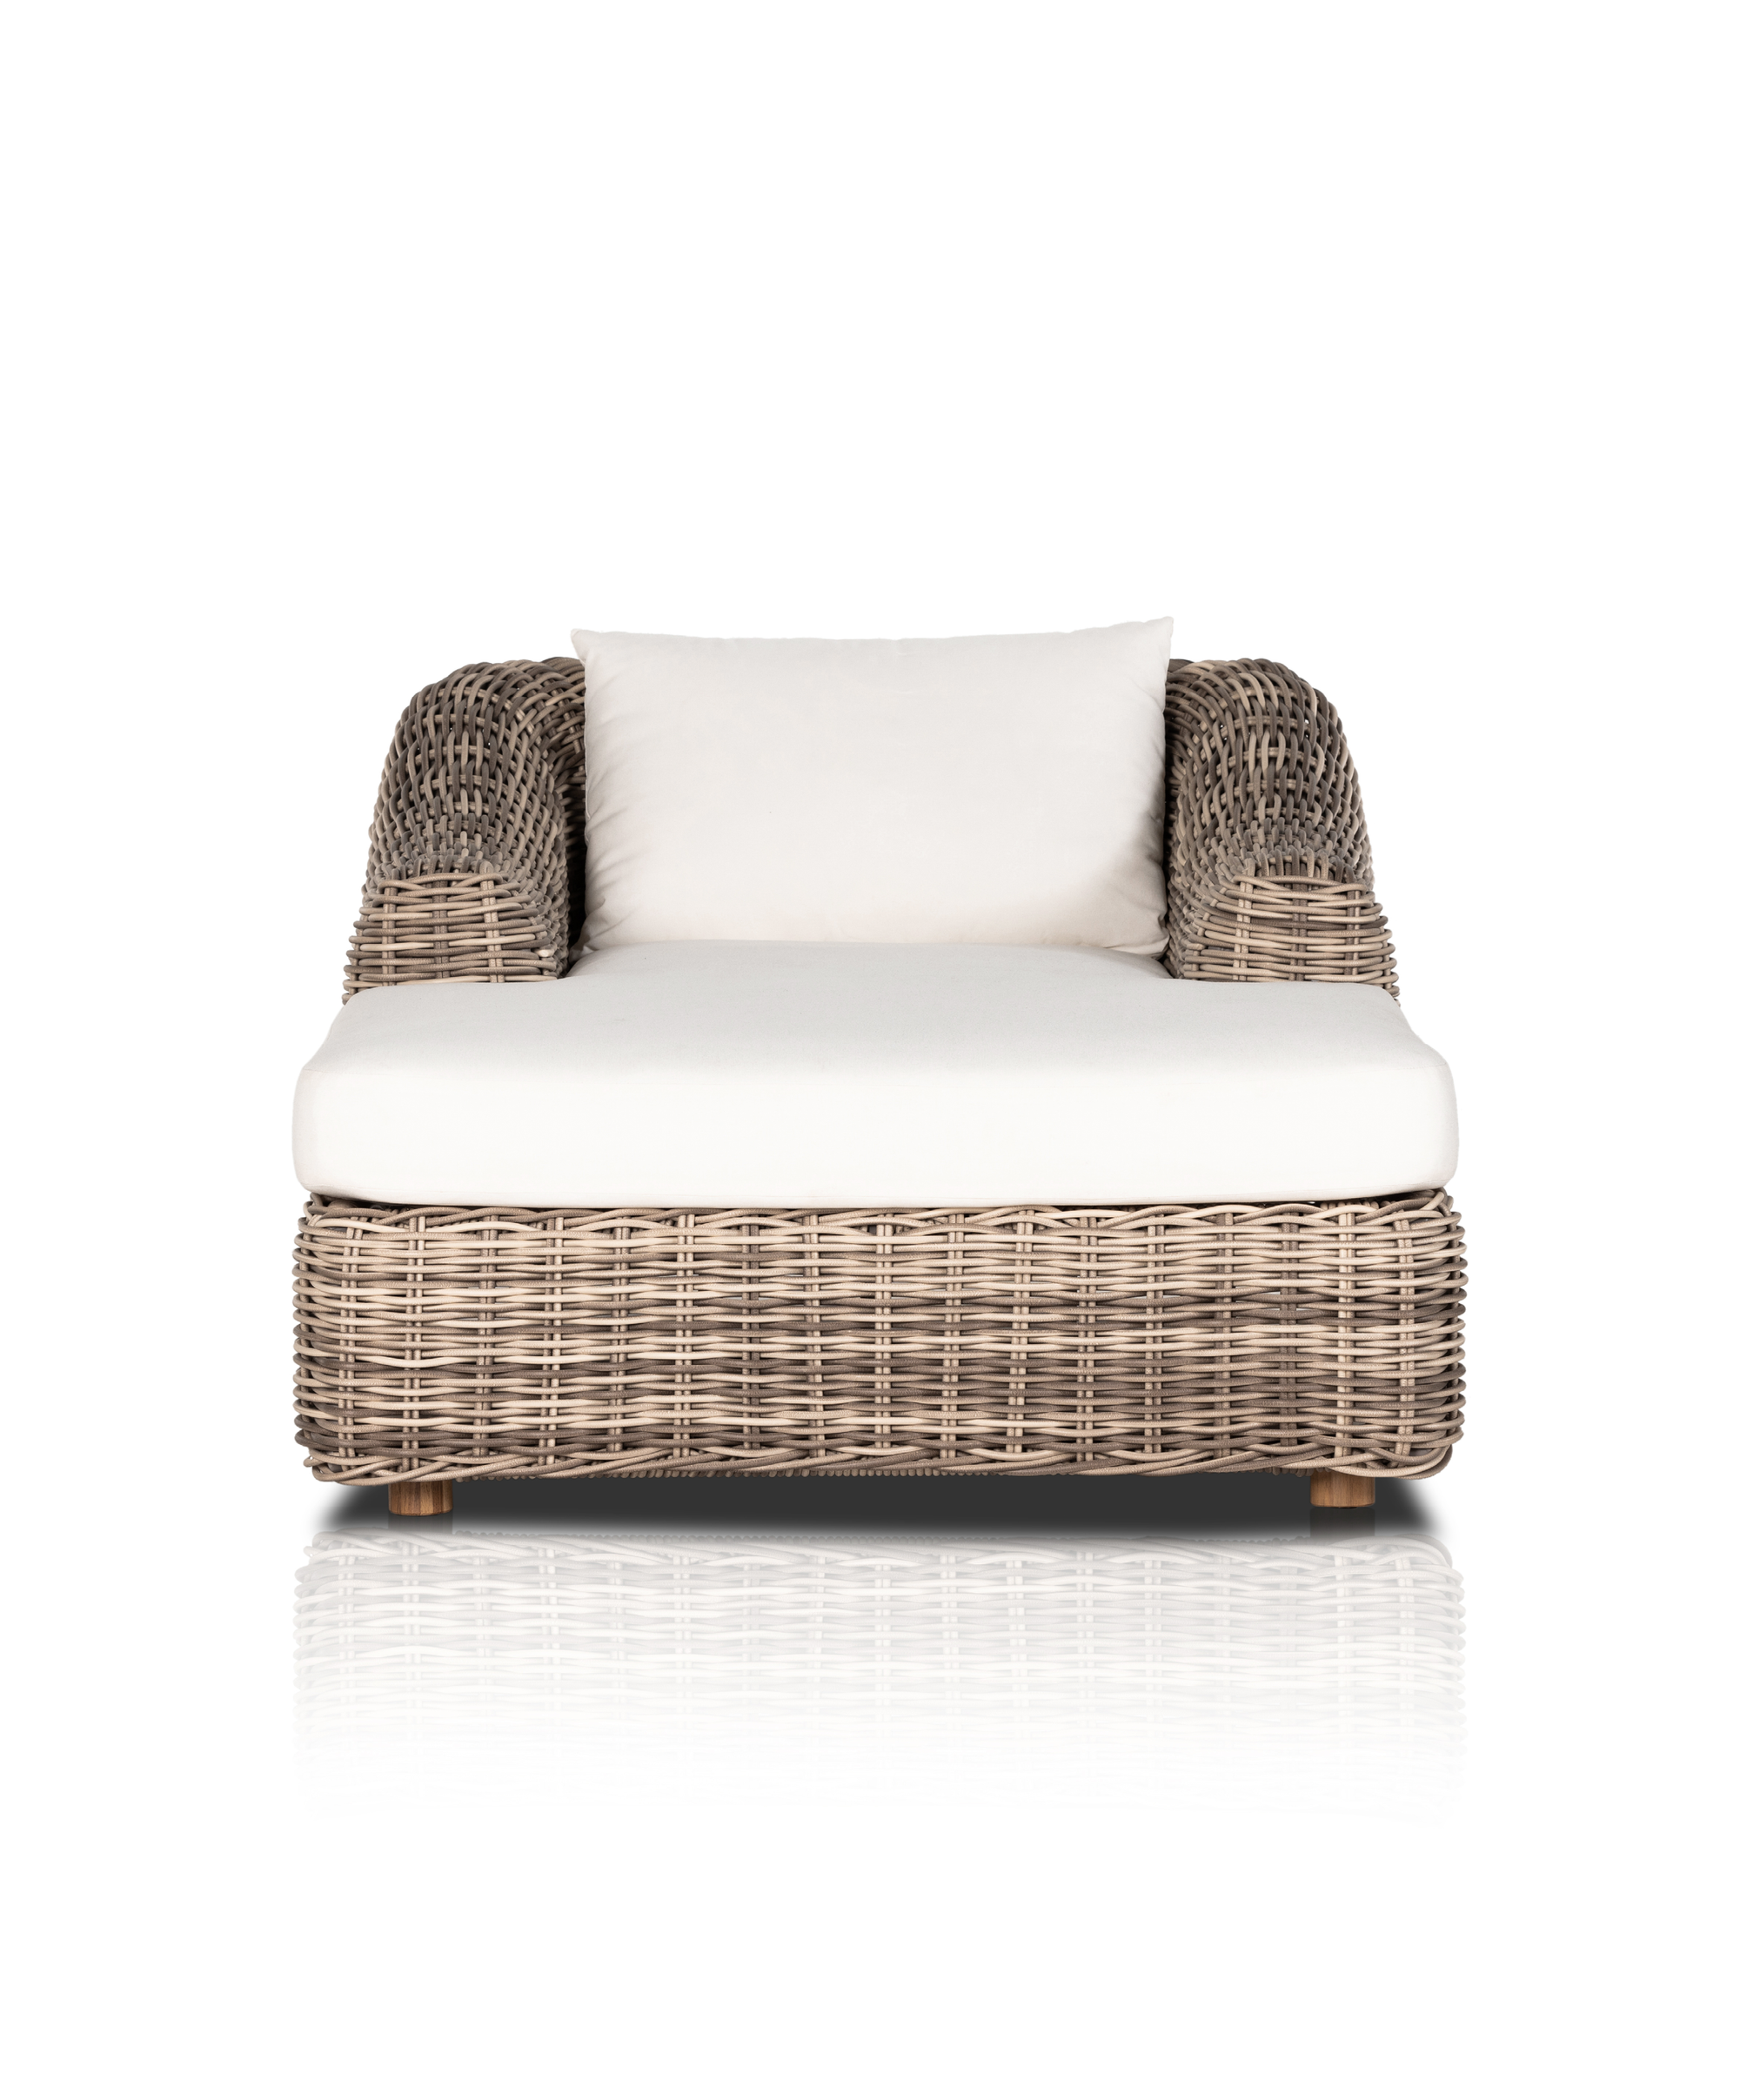 Ensley Outdoor Chaise Lounge